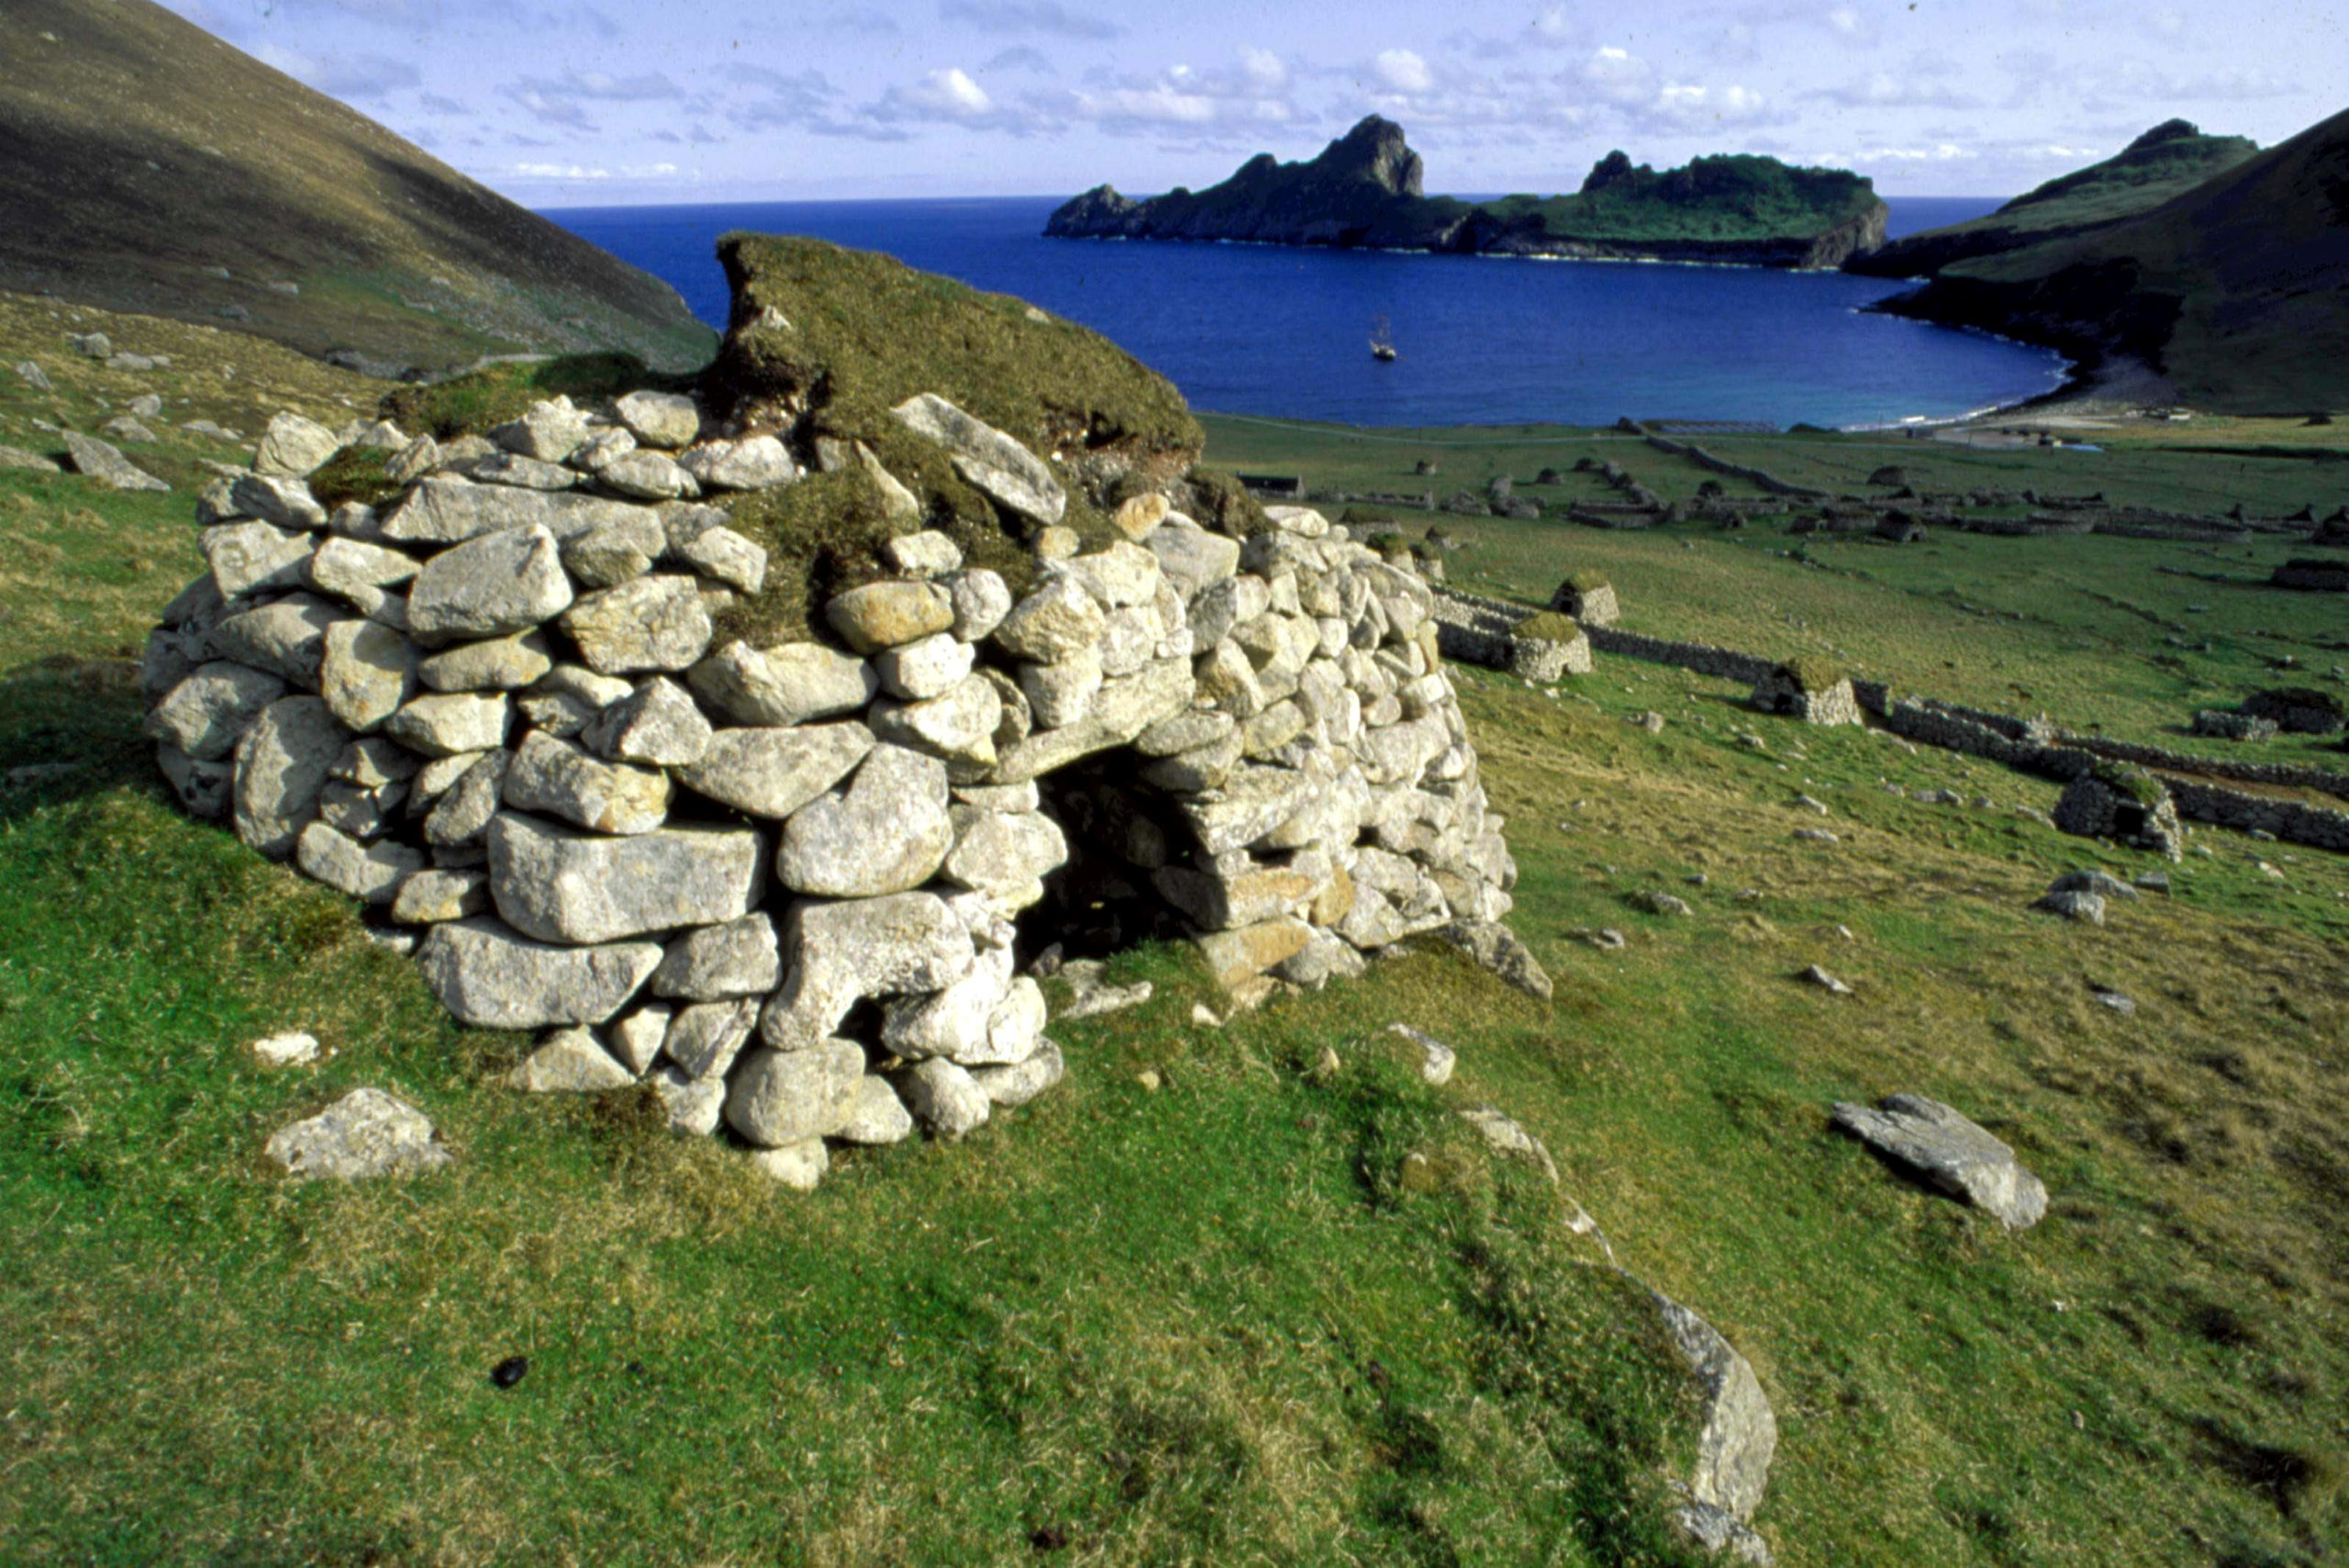 St Kilda: The remains of dwellings on the beautiful island.